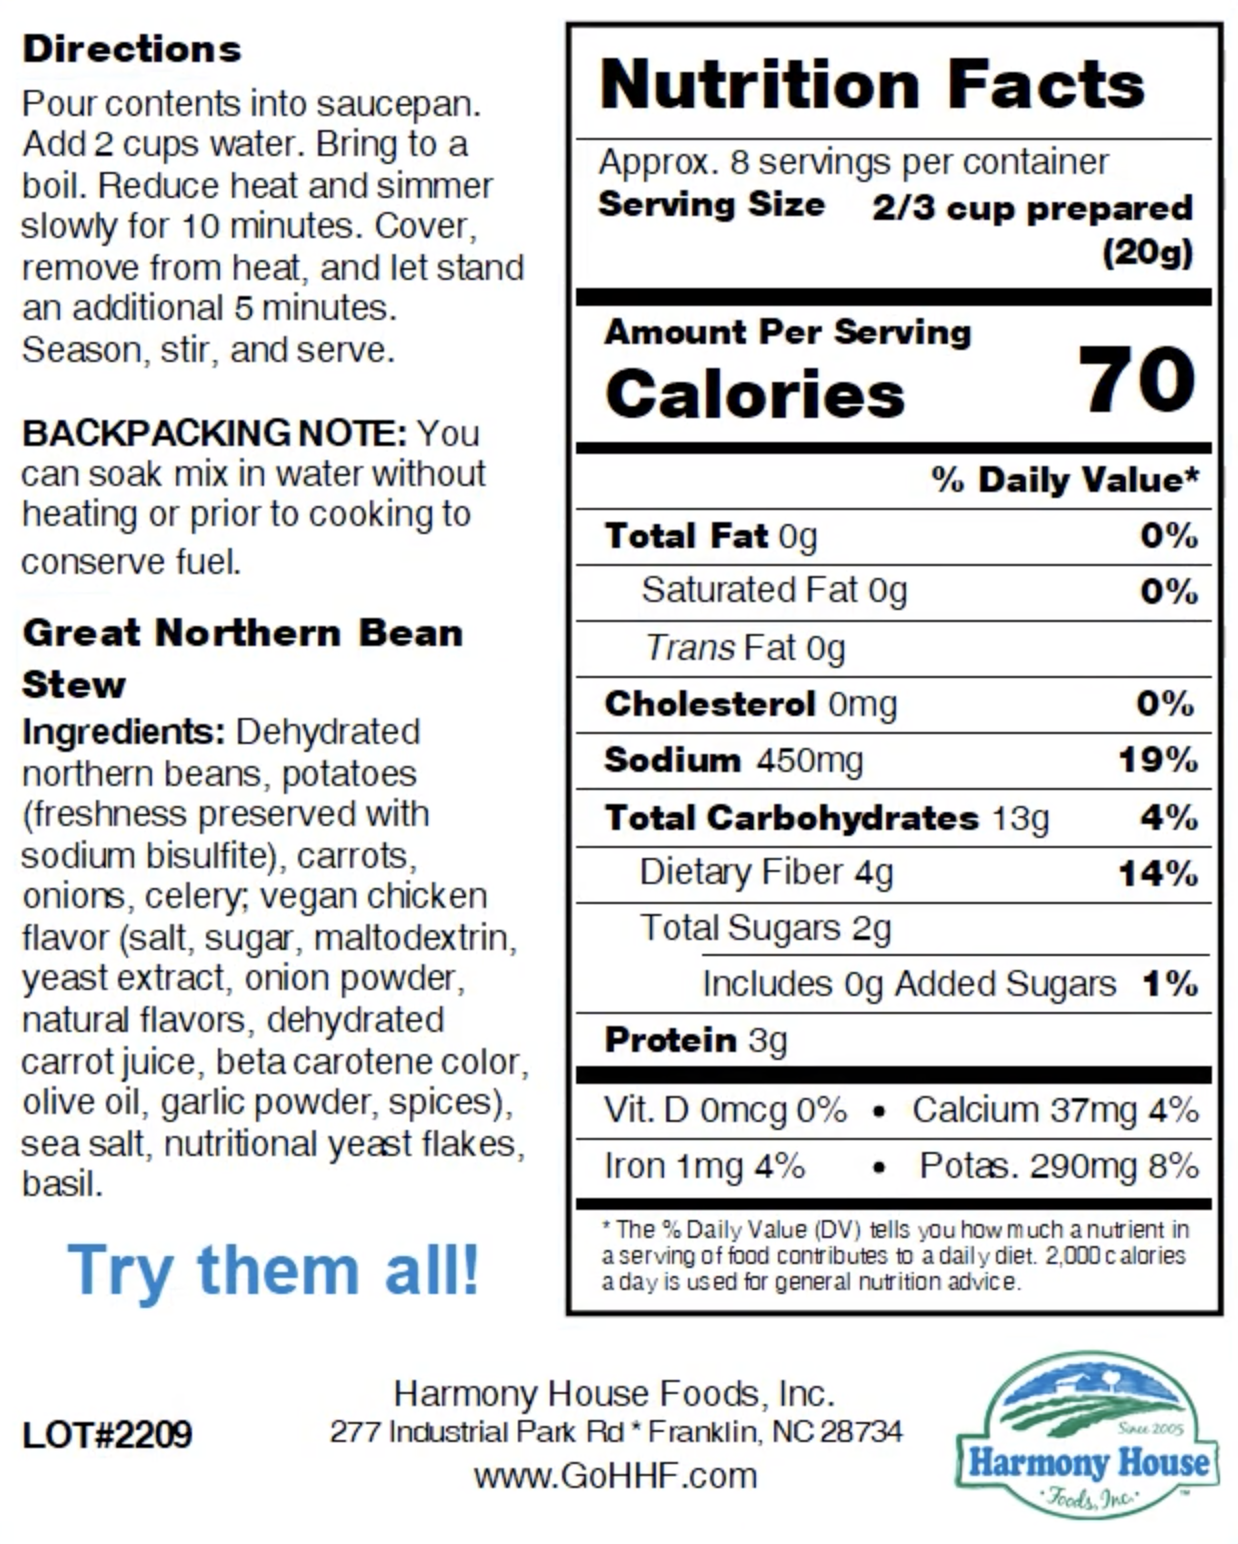 A nutrition label for Harmony House Great Northern Bean Stew.